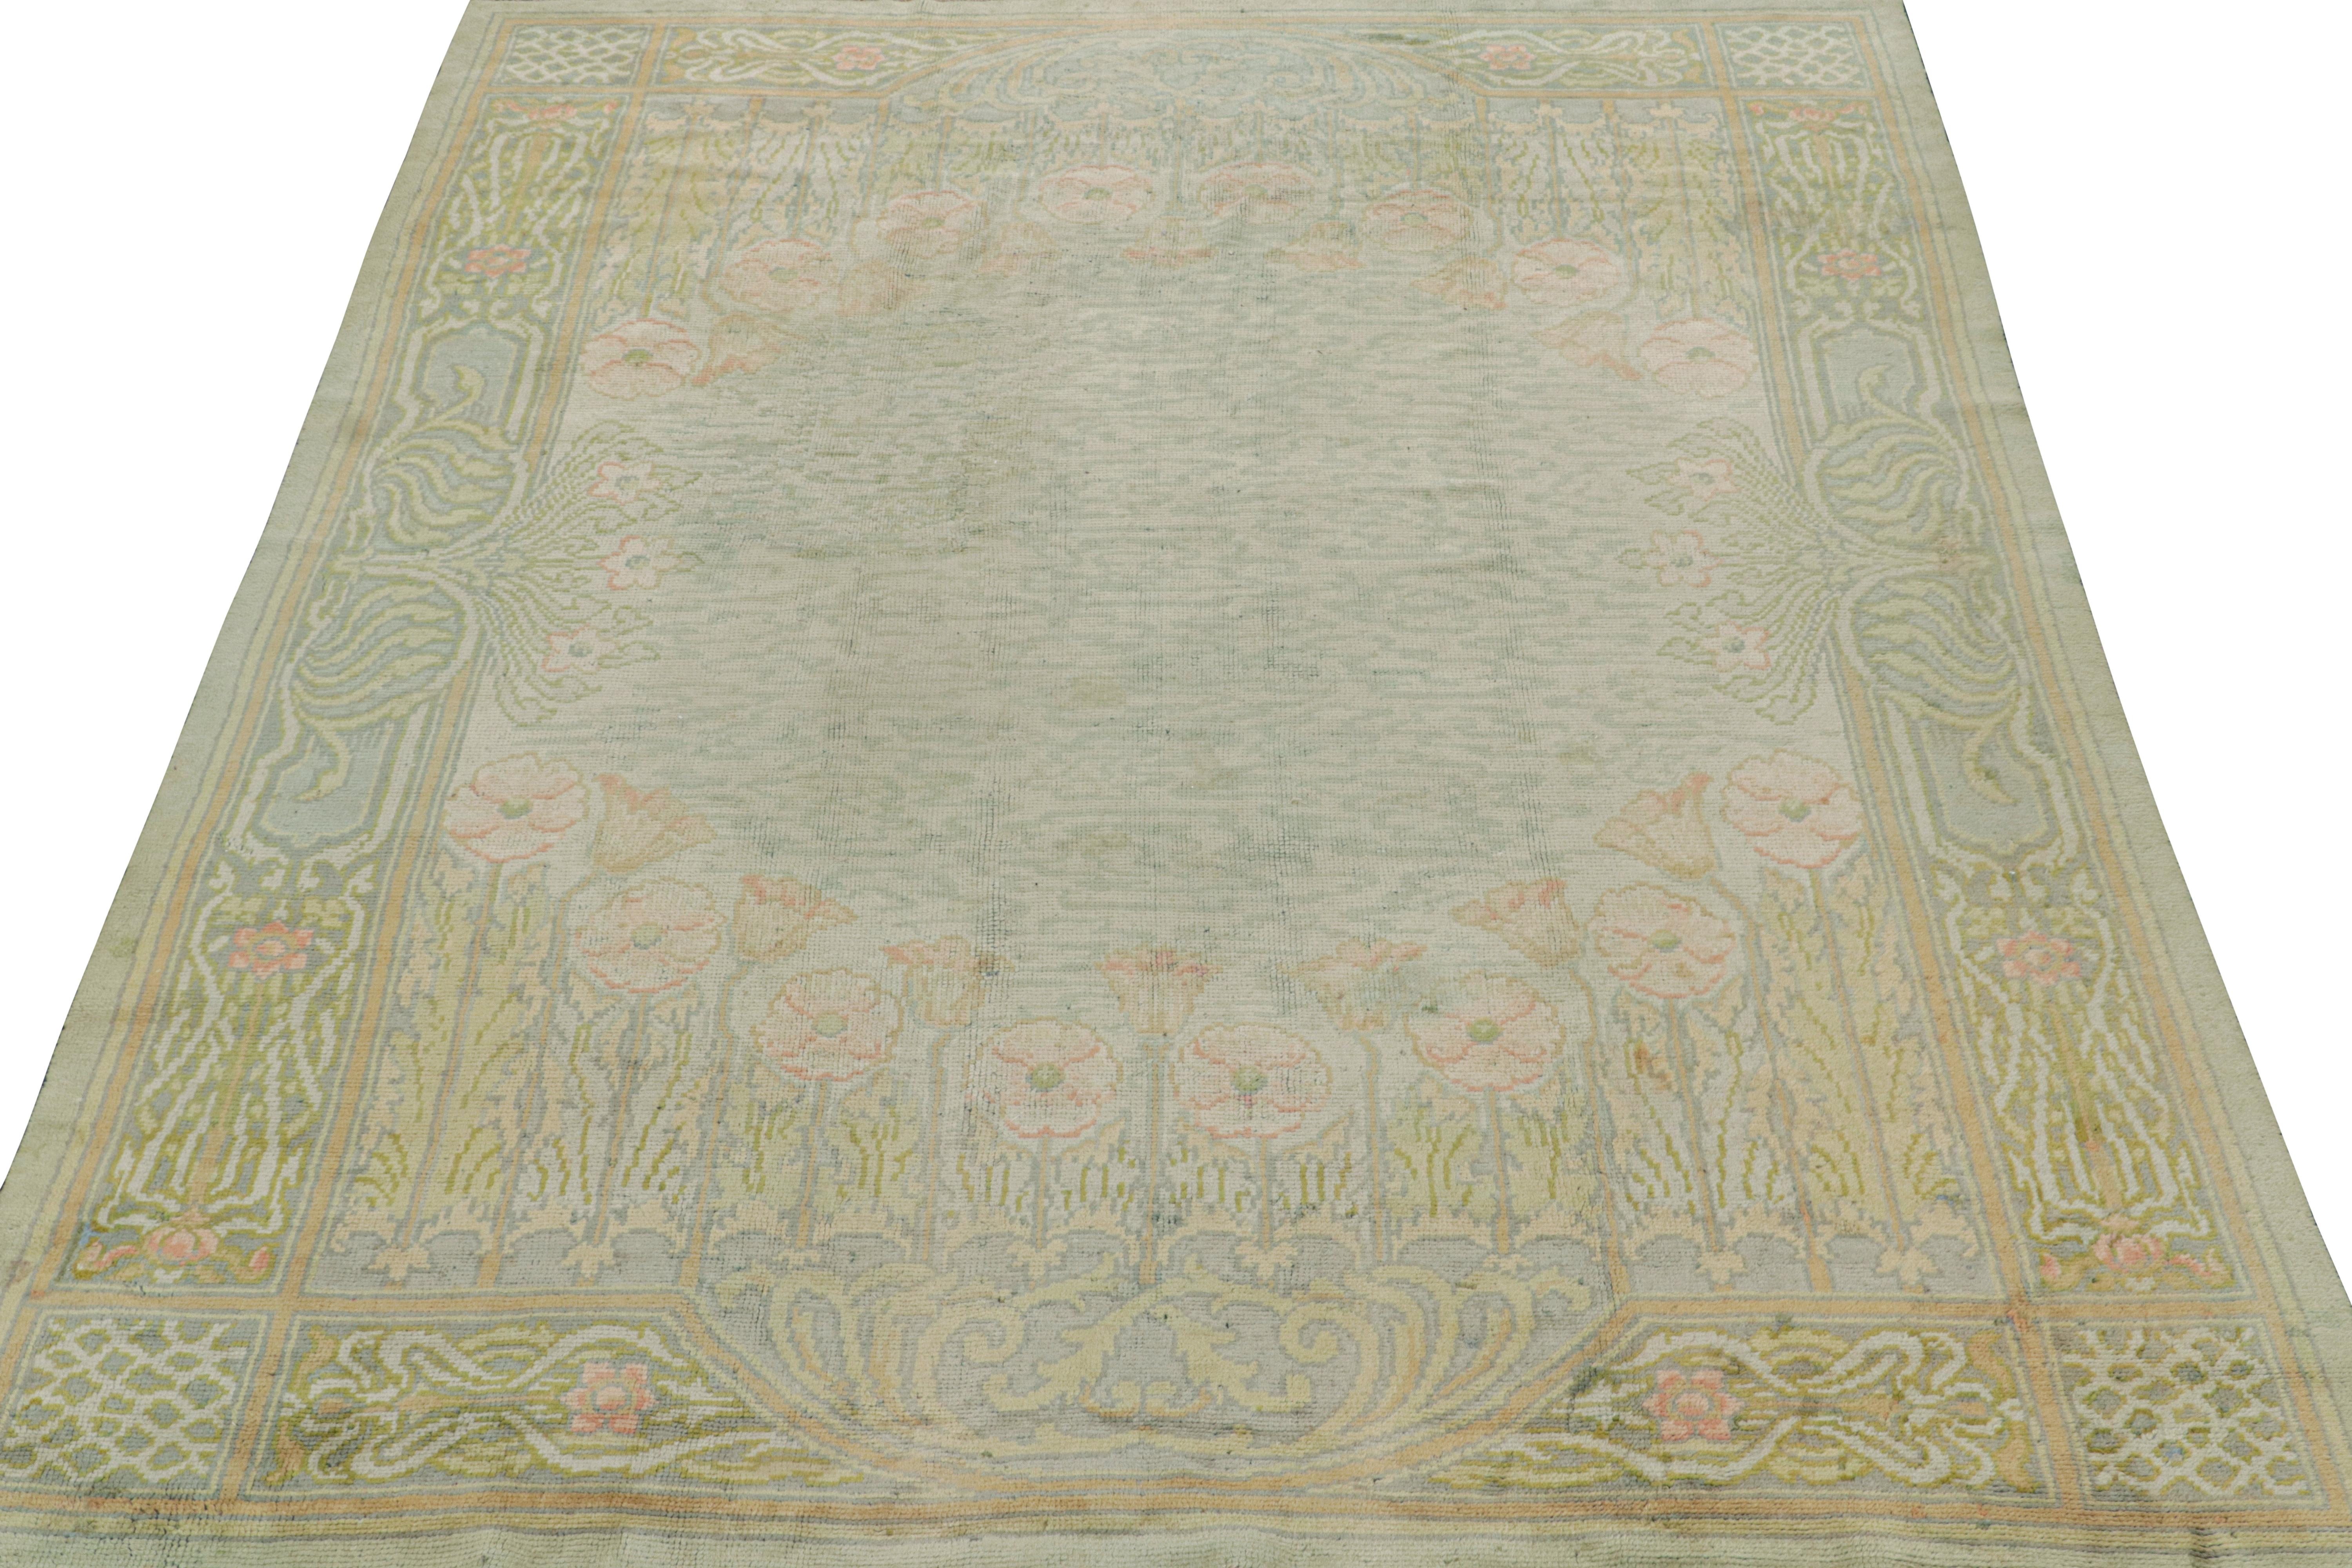 Hand-Knotted Antique Voysey Arts & Crafts Rug in Green with Floral Patterns For Sale